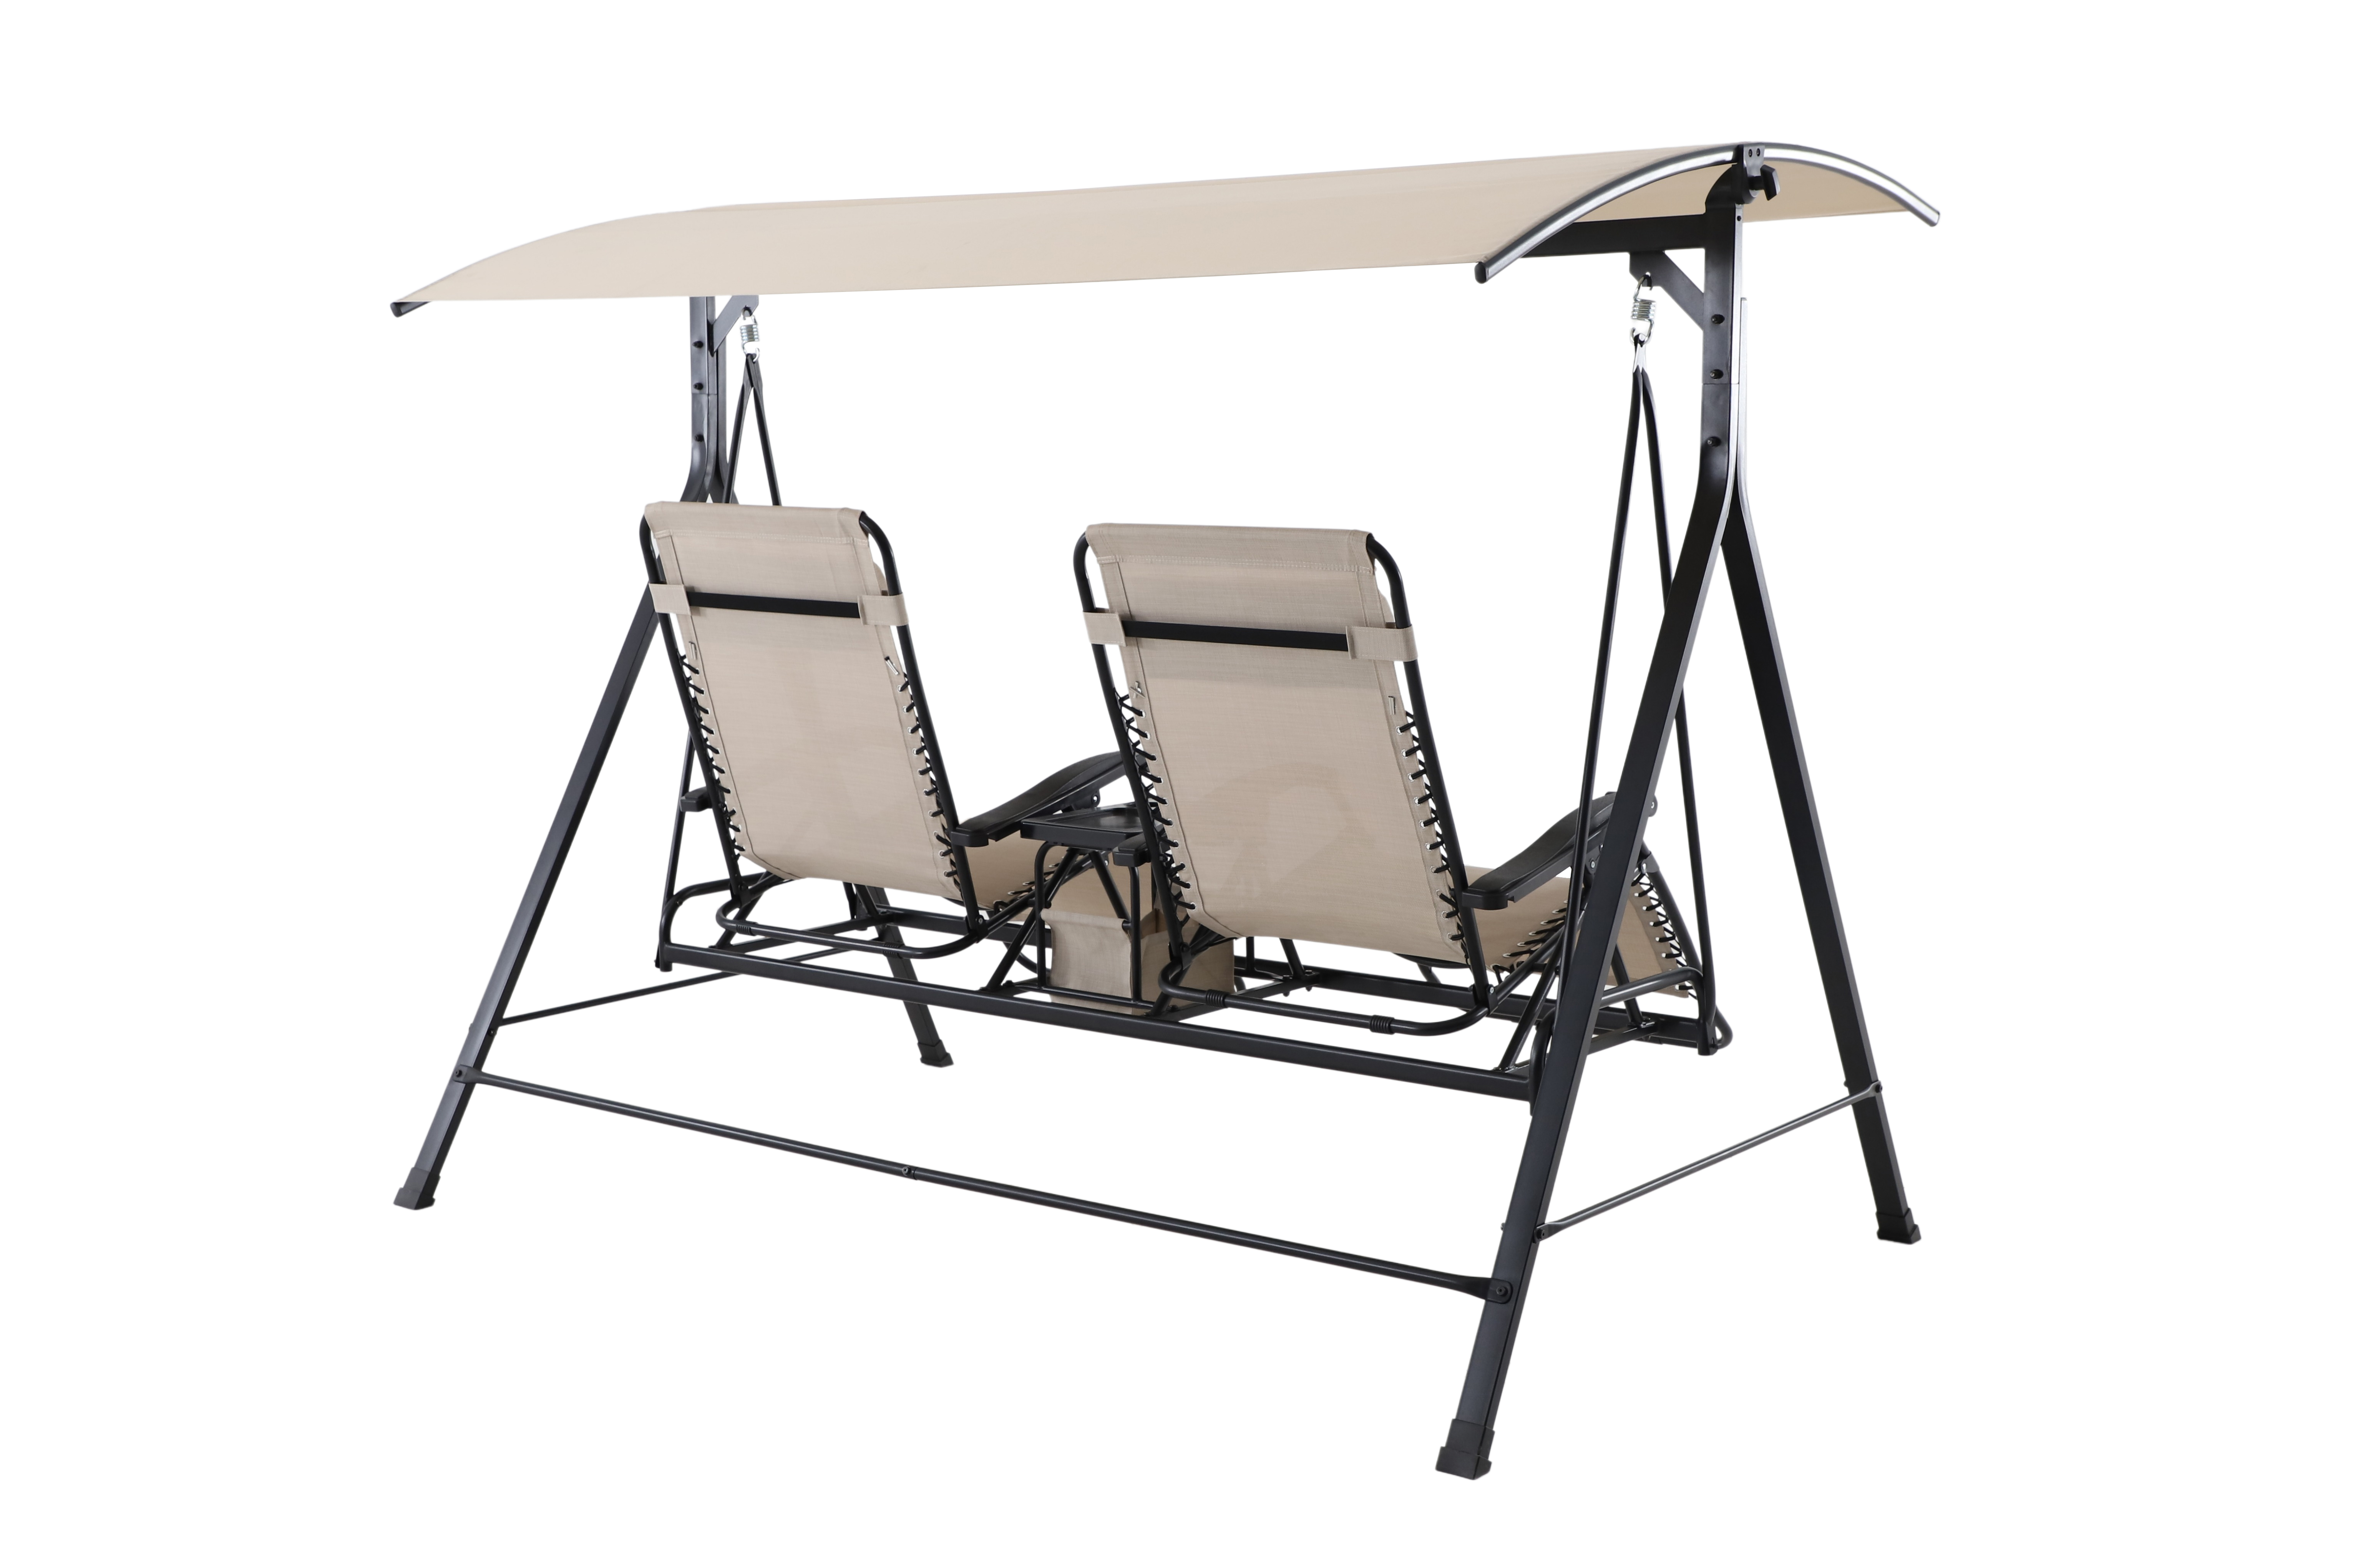 Mainstays 2-Seat Reclining Oversized Zero-Gravity Swing with Canopy and Center Storage Console, Beige/Black - image 3 of 9